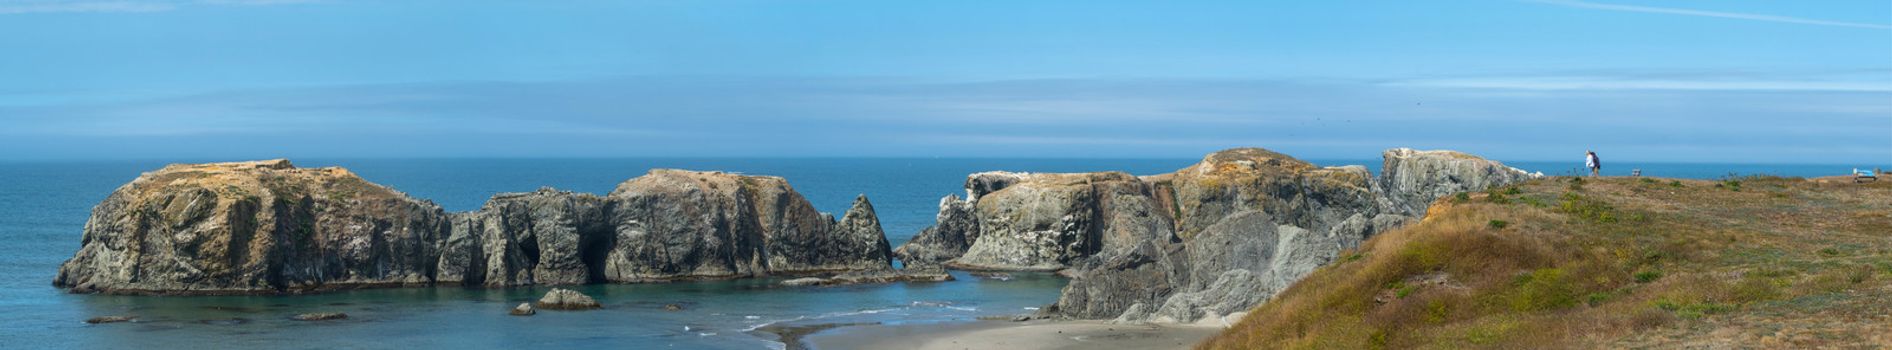 5 Shot panorama of one of Oregon's favorite seacoast parks